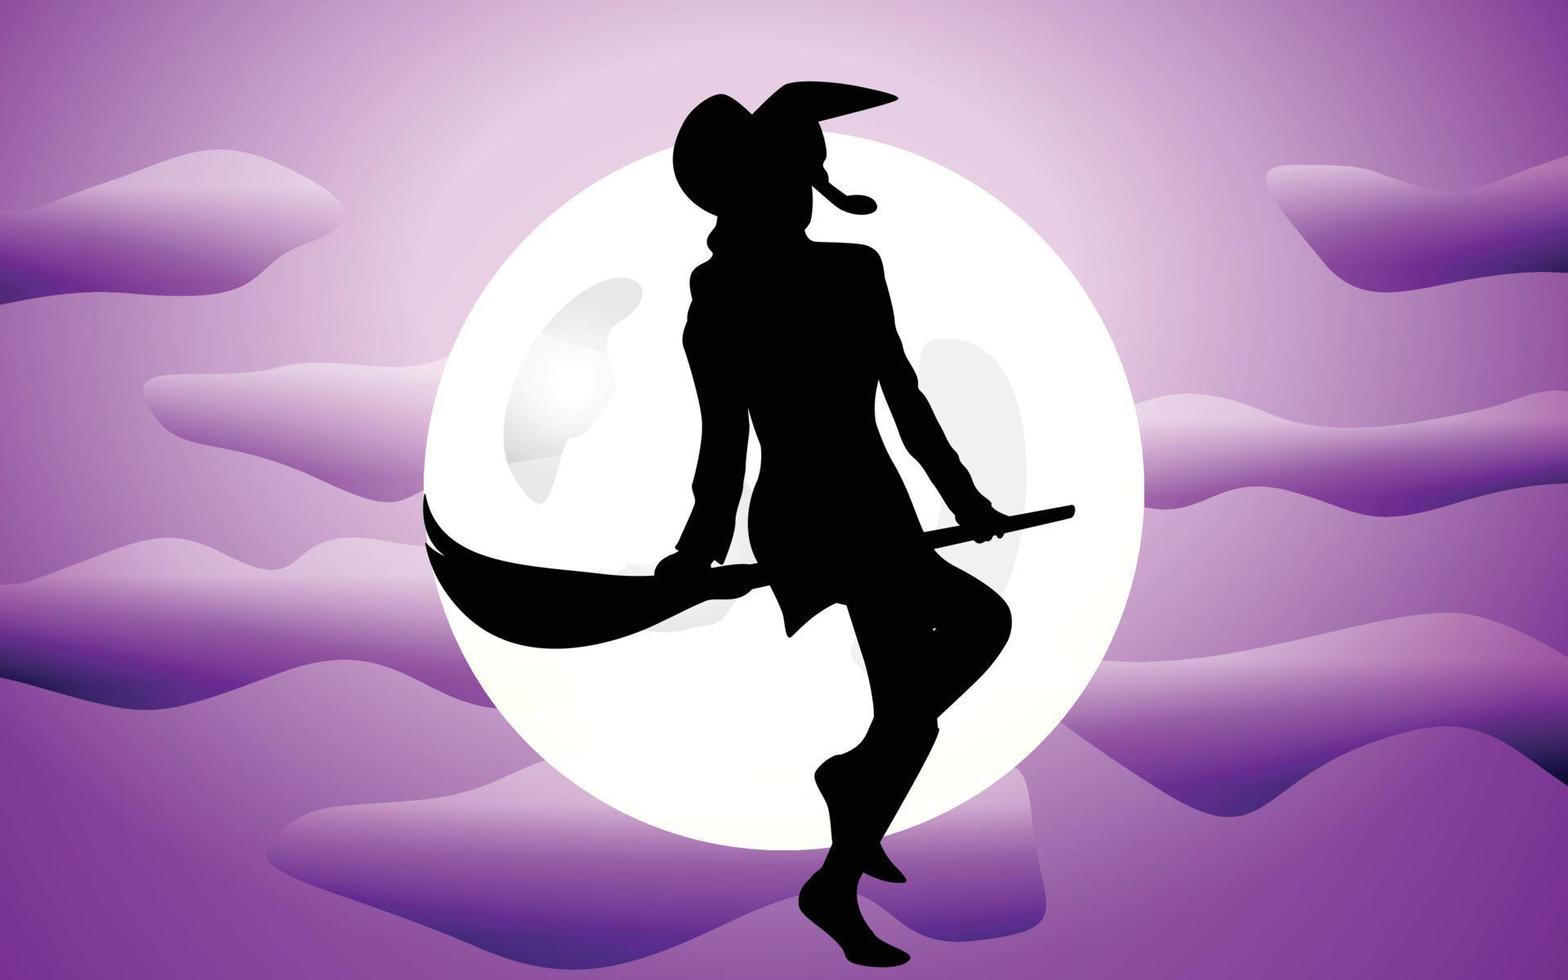 witch in front of full moon, Hand Drawn vector illustration of witch with broom, hand drawn vector illustration for halloween party background and invitation.